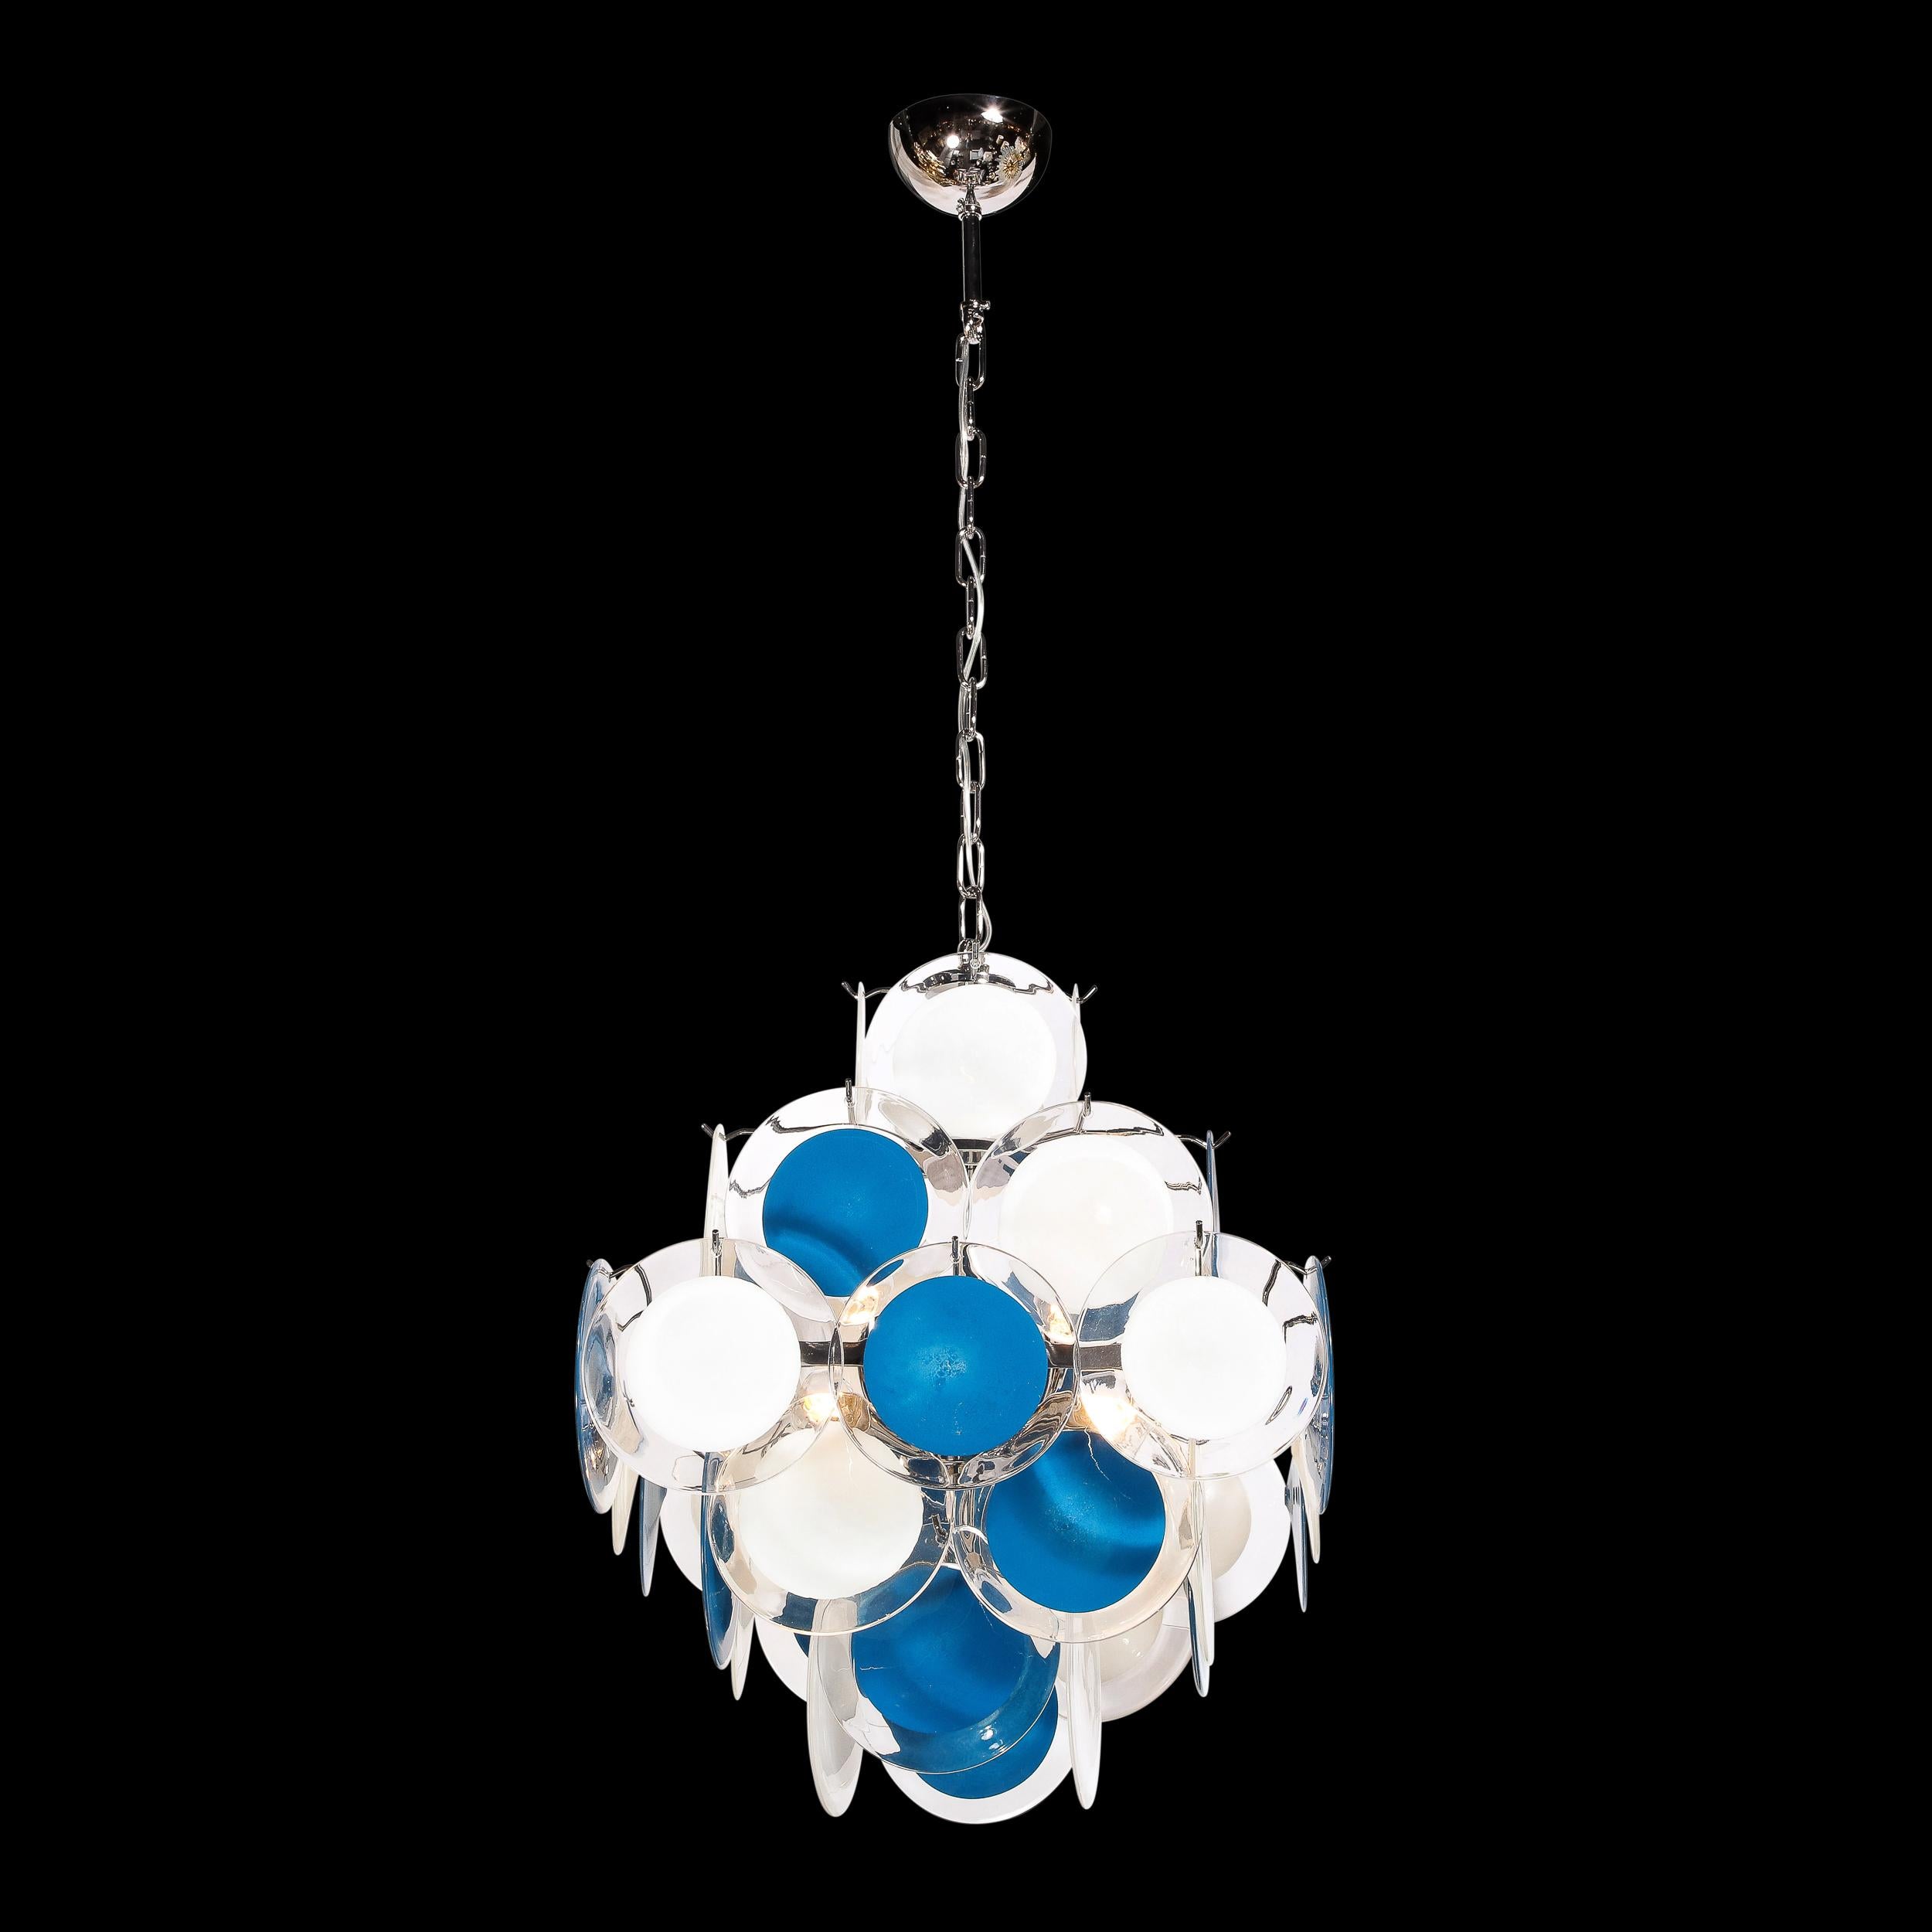 This stunning modernist pagoda style chandelier was realized in Murano, Italy- the island off the coast of Venice renowned for centuries for its superlative glass production. It features a pagoda style form that is widest at its midsection, and